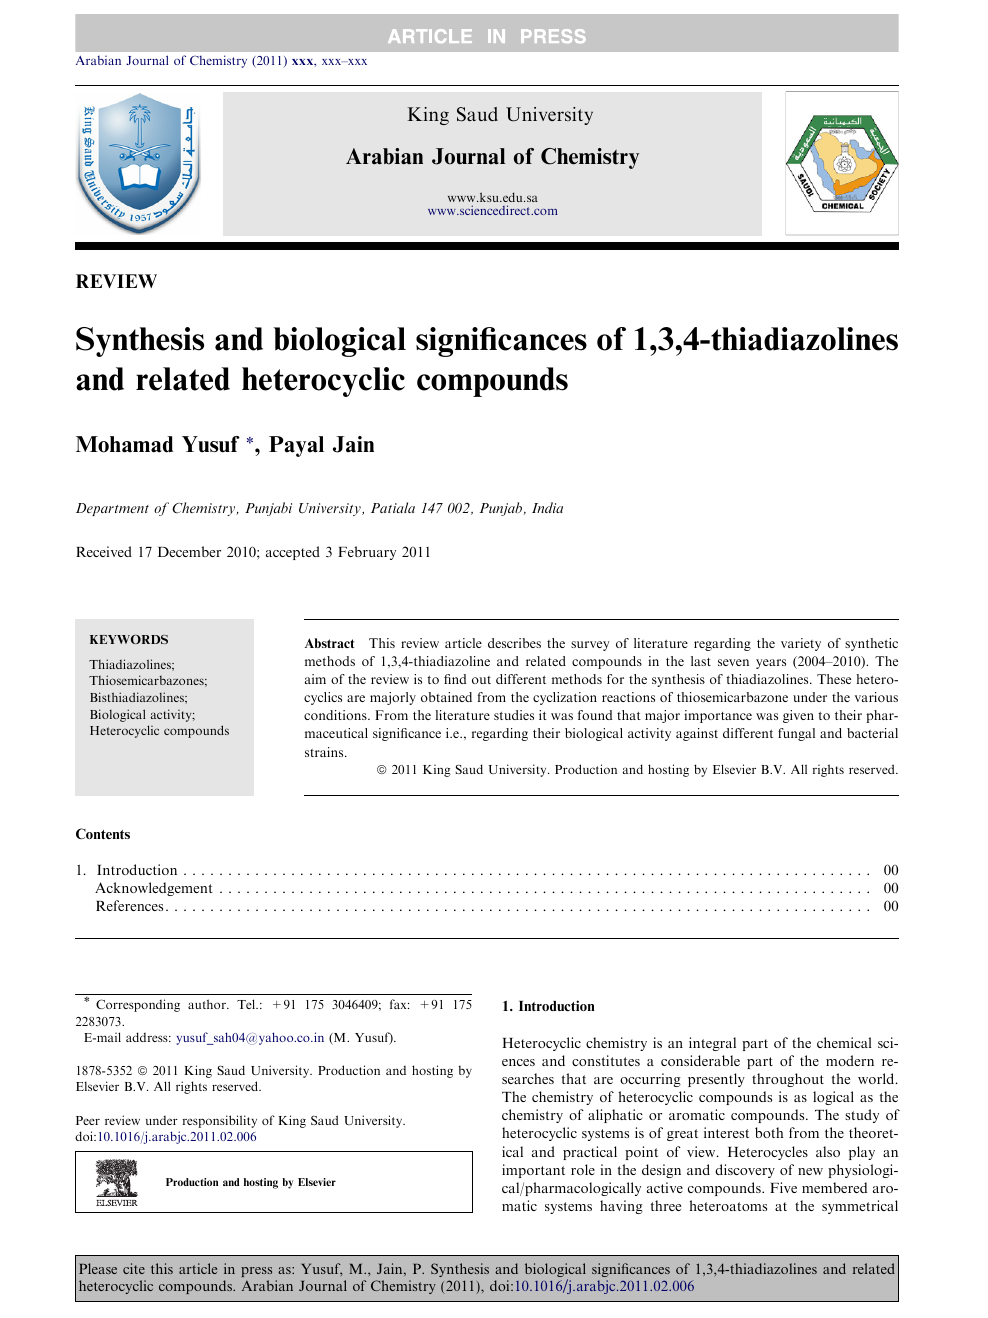 Synthesis And Biological Significances Of 1 3 4 Thiadiazolines And Related Heterocyclic Compounds Topic Of Research Paper In Chemical Sciences Download Scholarly Article Pdf And Read For Free On Cyberleninka Open Science Hub